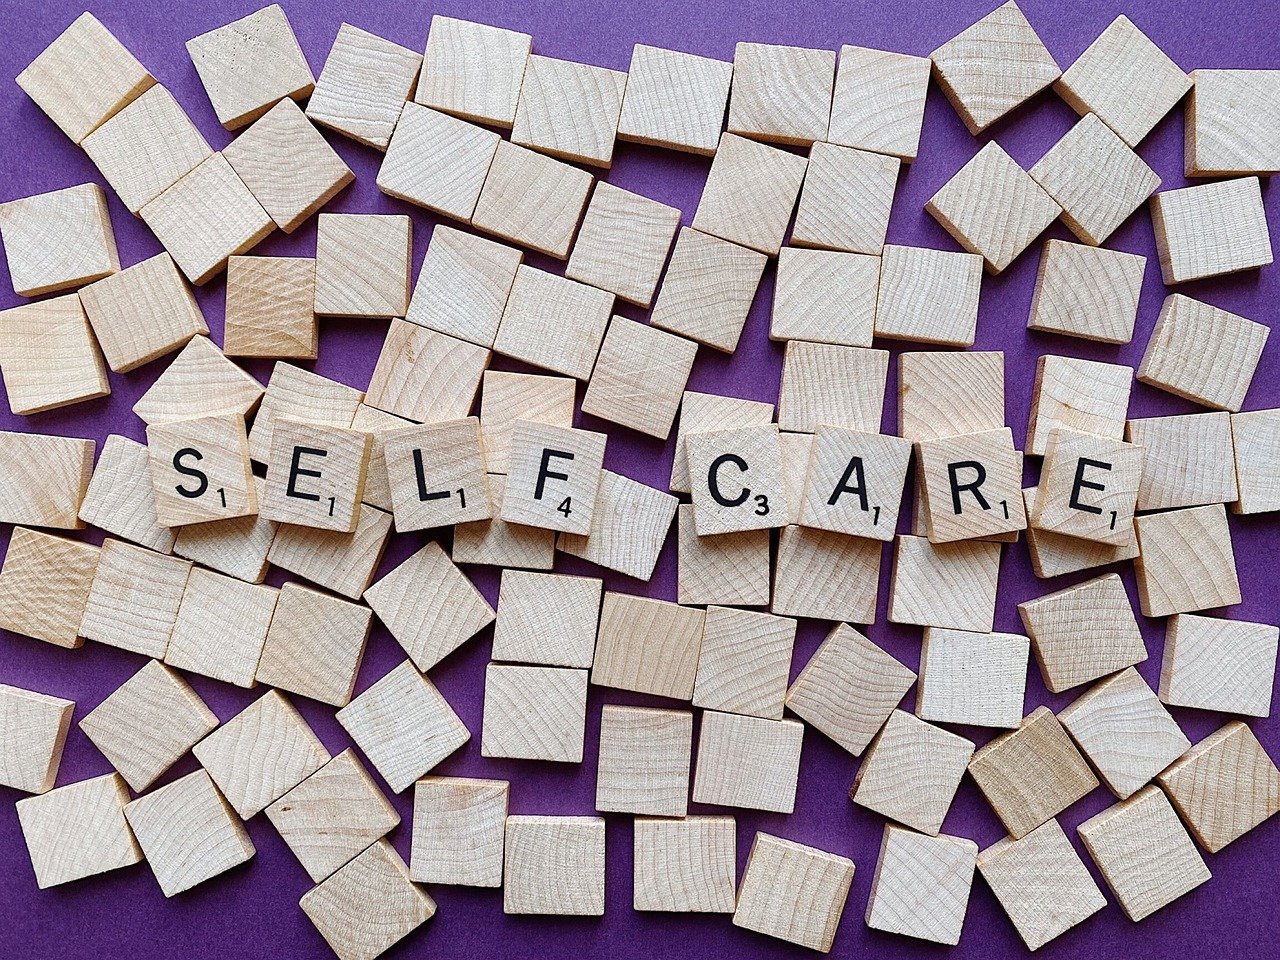 Self-Care Practices for Mental Health